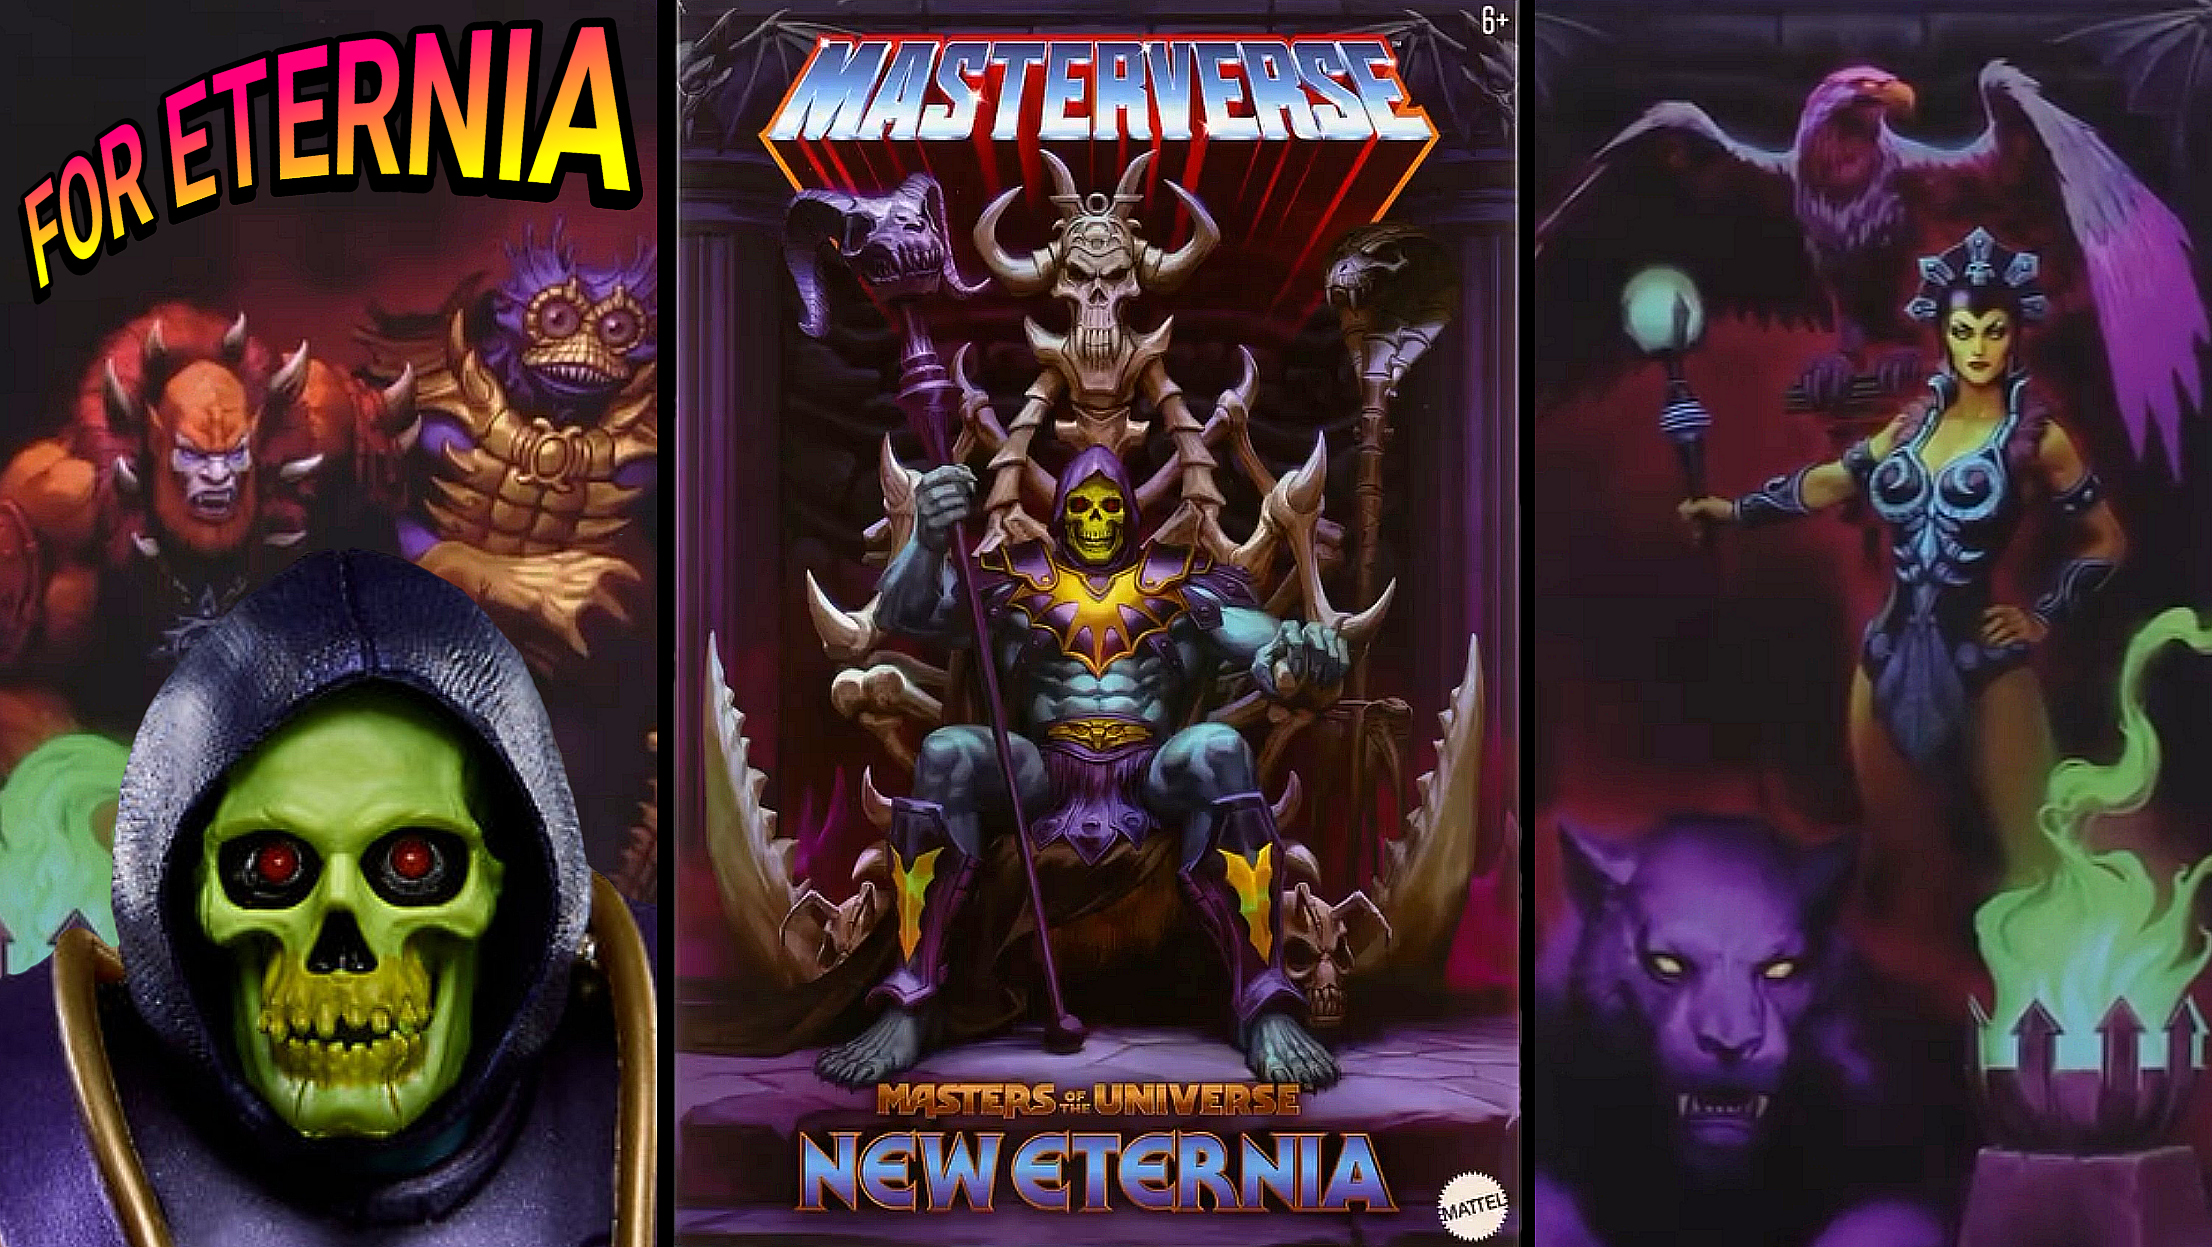 *UPDATED* Full Packaging reveal for the upcoming Masterverse ”New Eternia” SKELETOR WITH HAVOC THRONE set